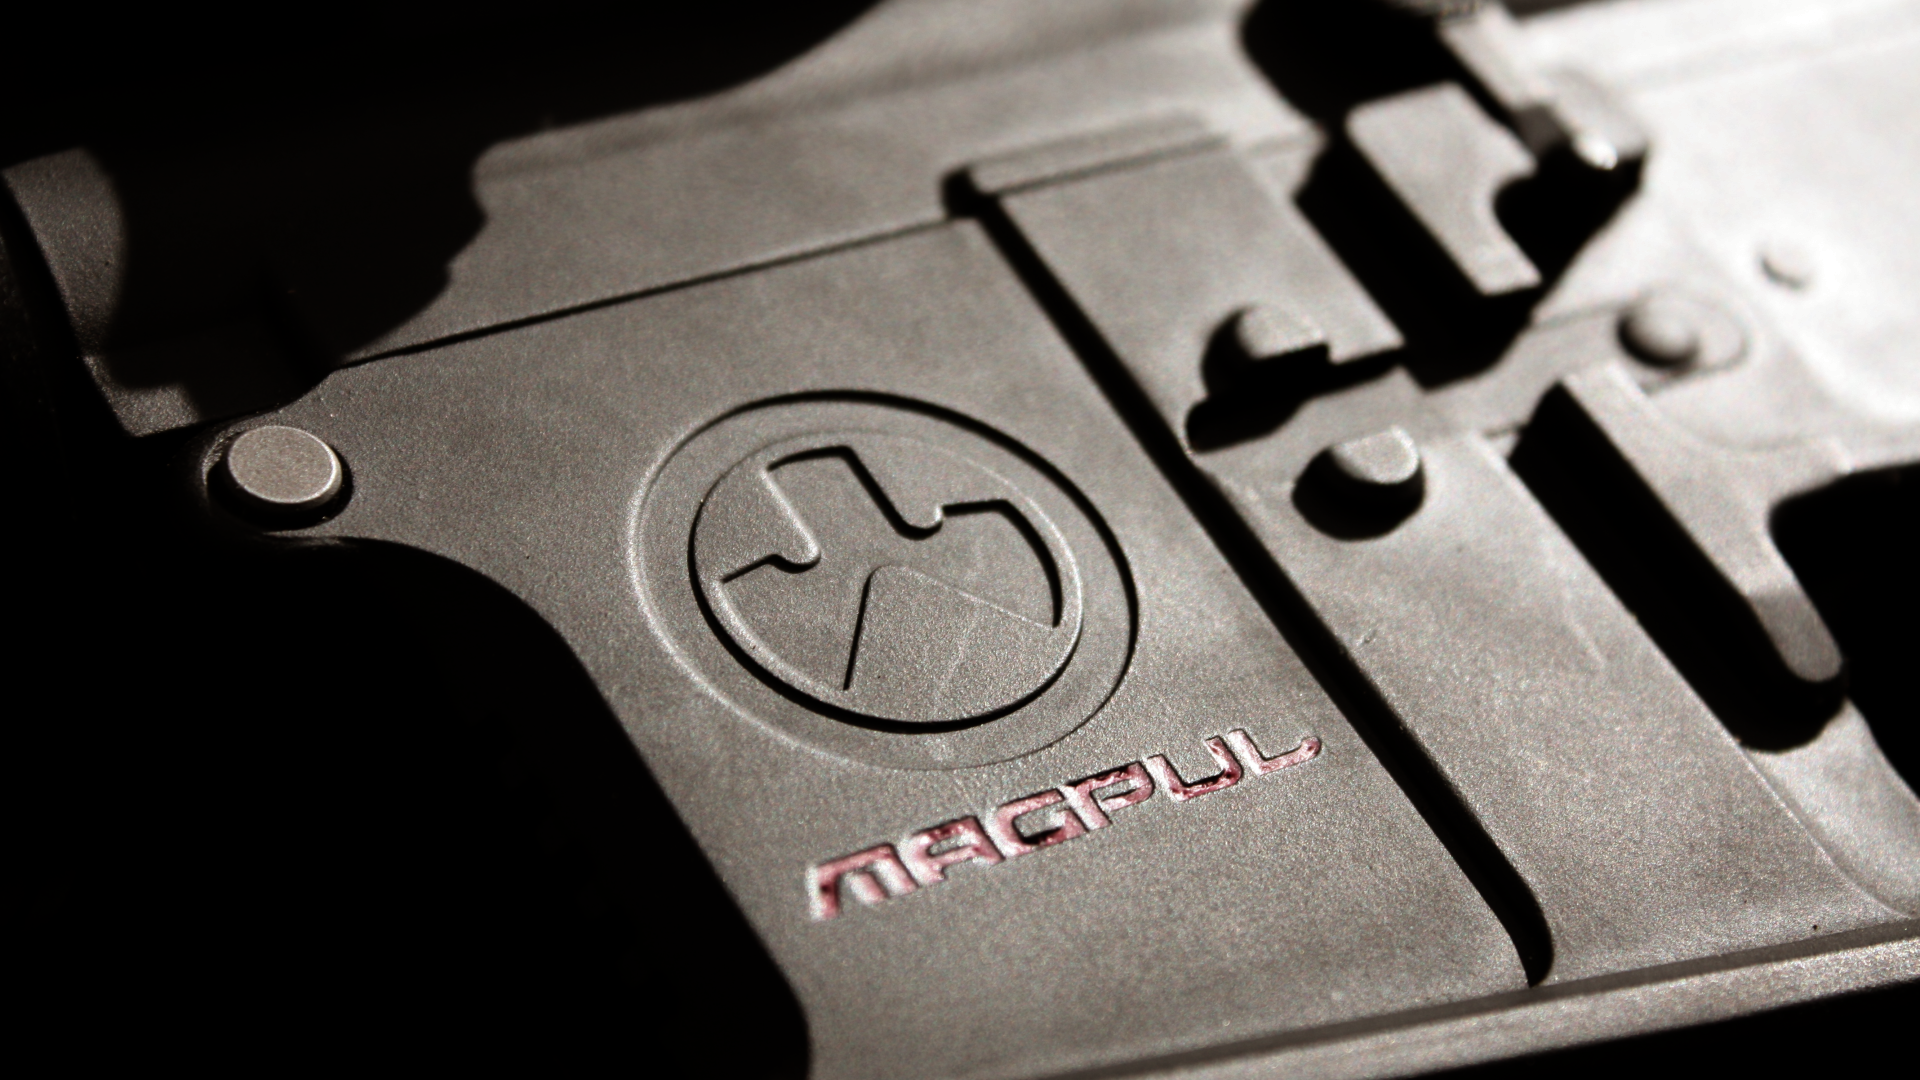 Magpul Logo Wallpaper submited images.